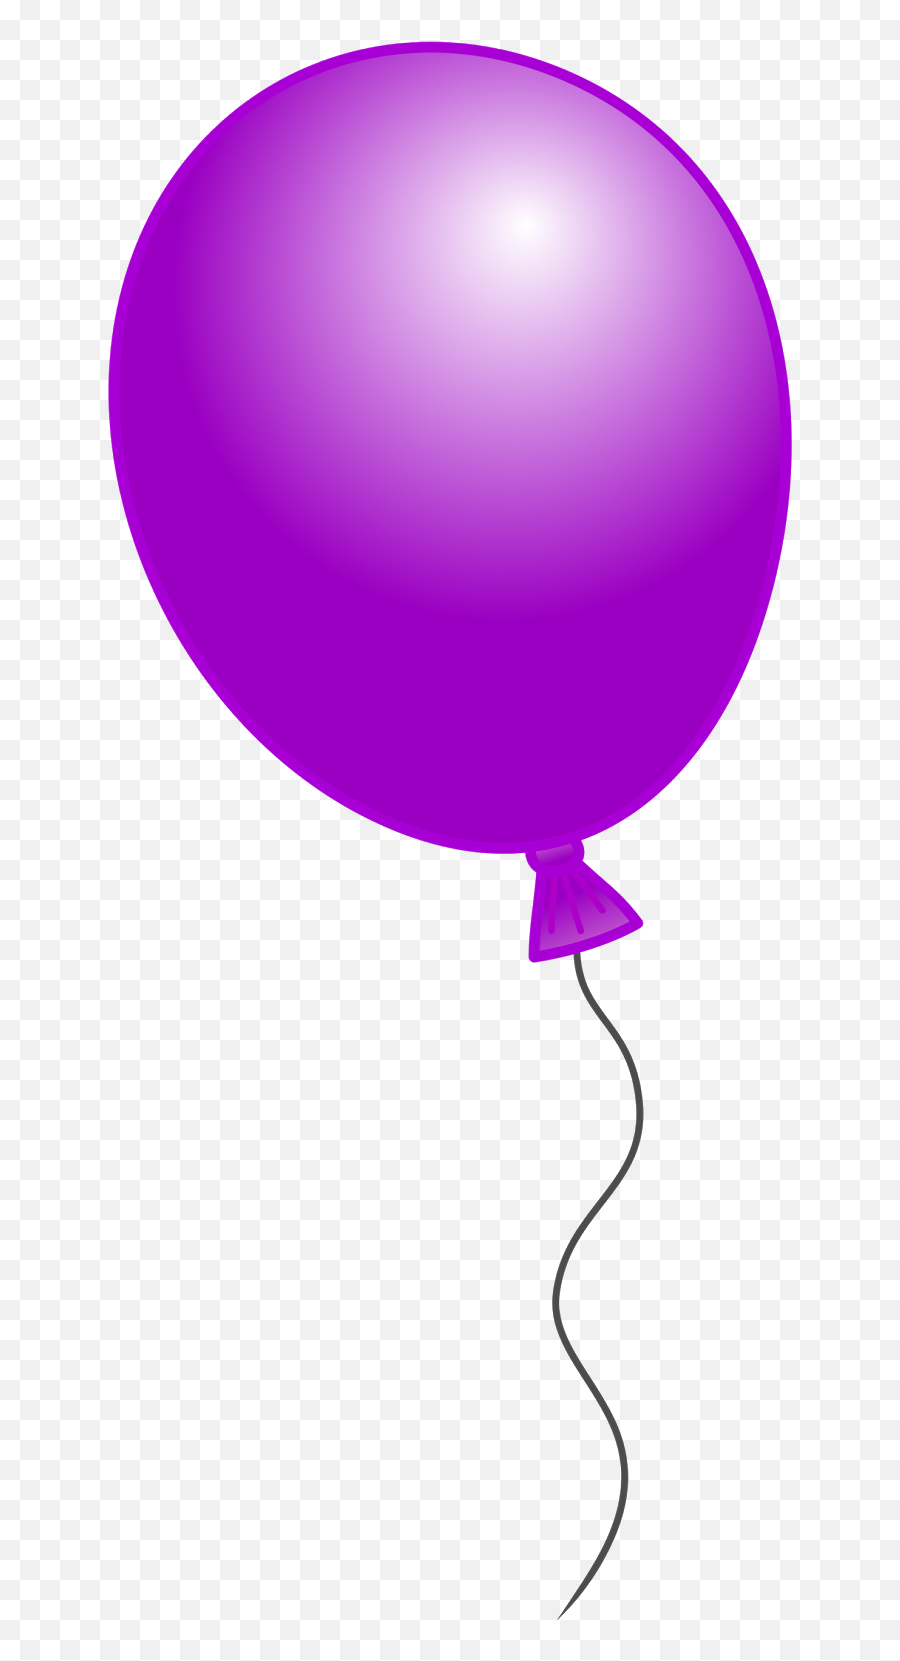 Birthday Balloon Images Free Download On Clipartmag - Single Birthday Balloon Cartoon Emoji,Emojis Balloons